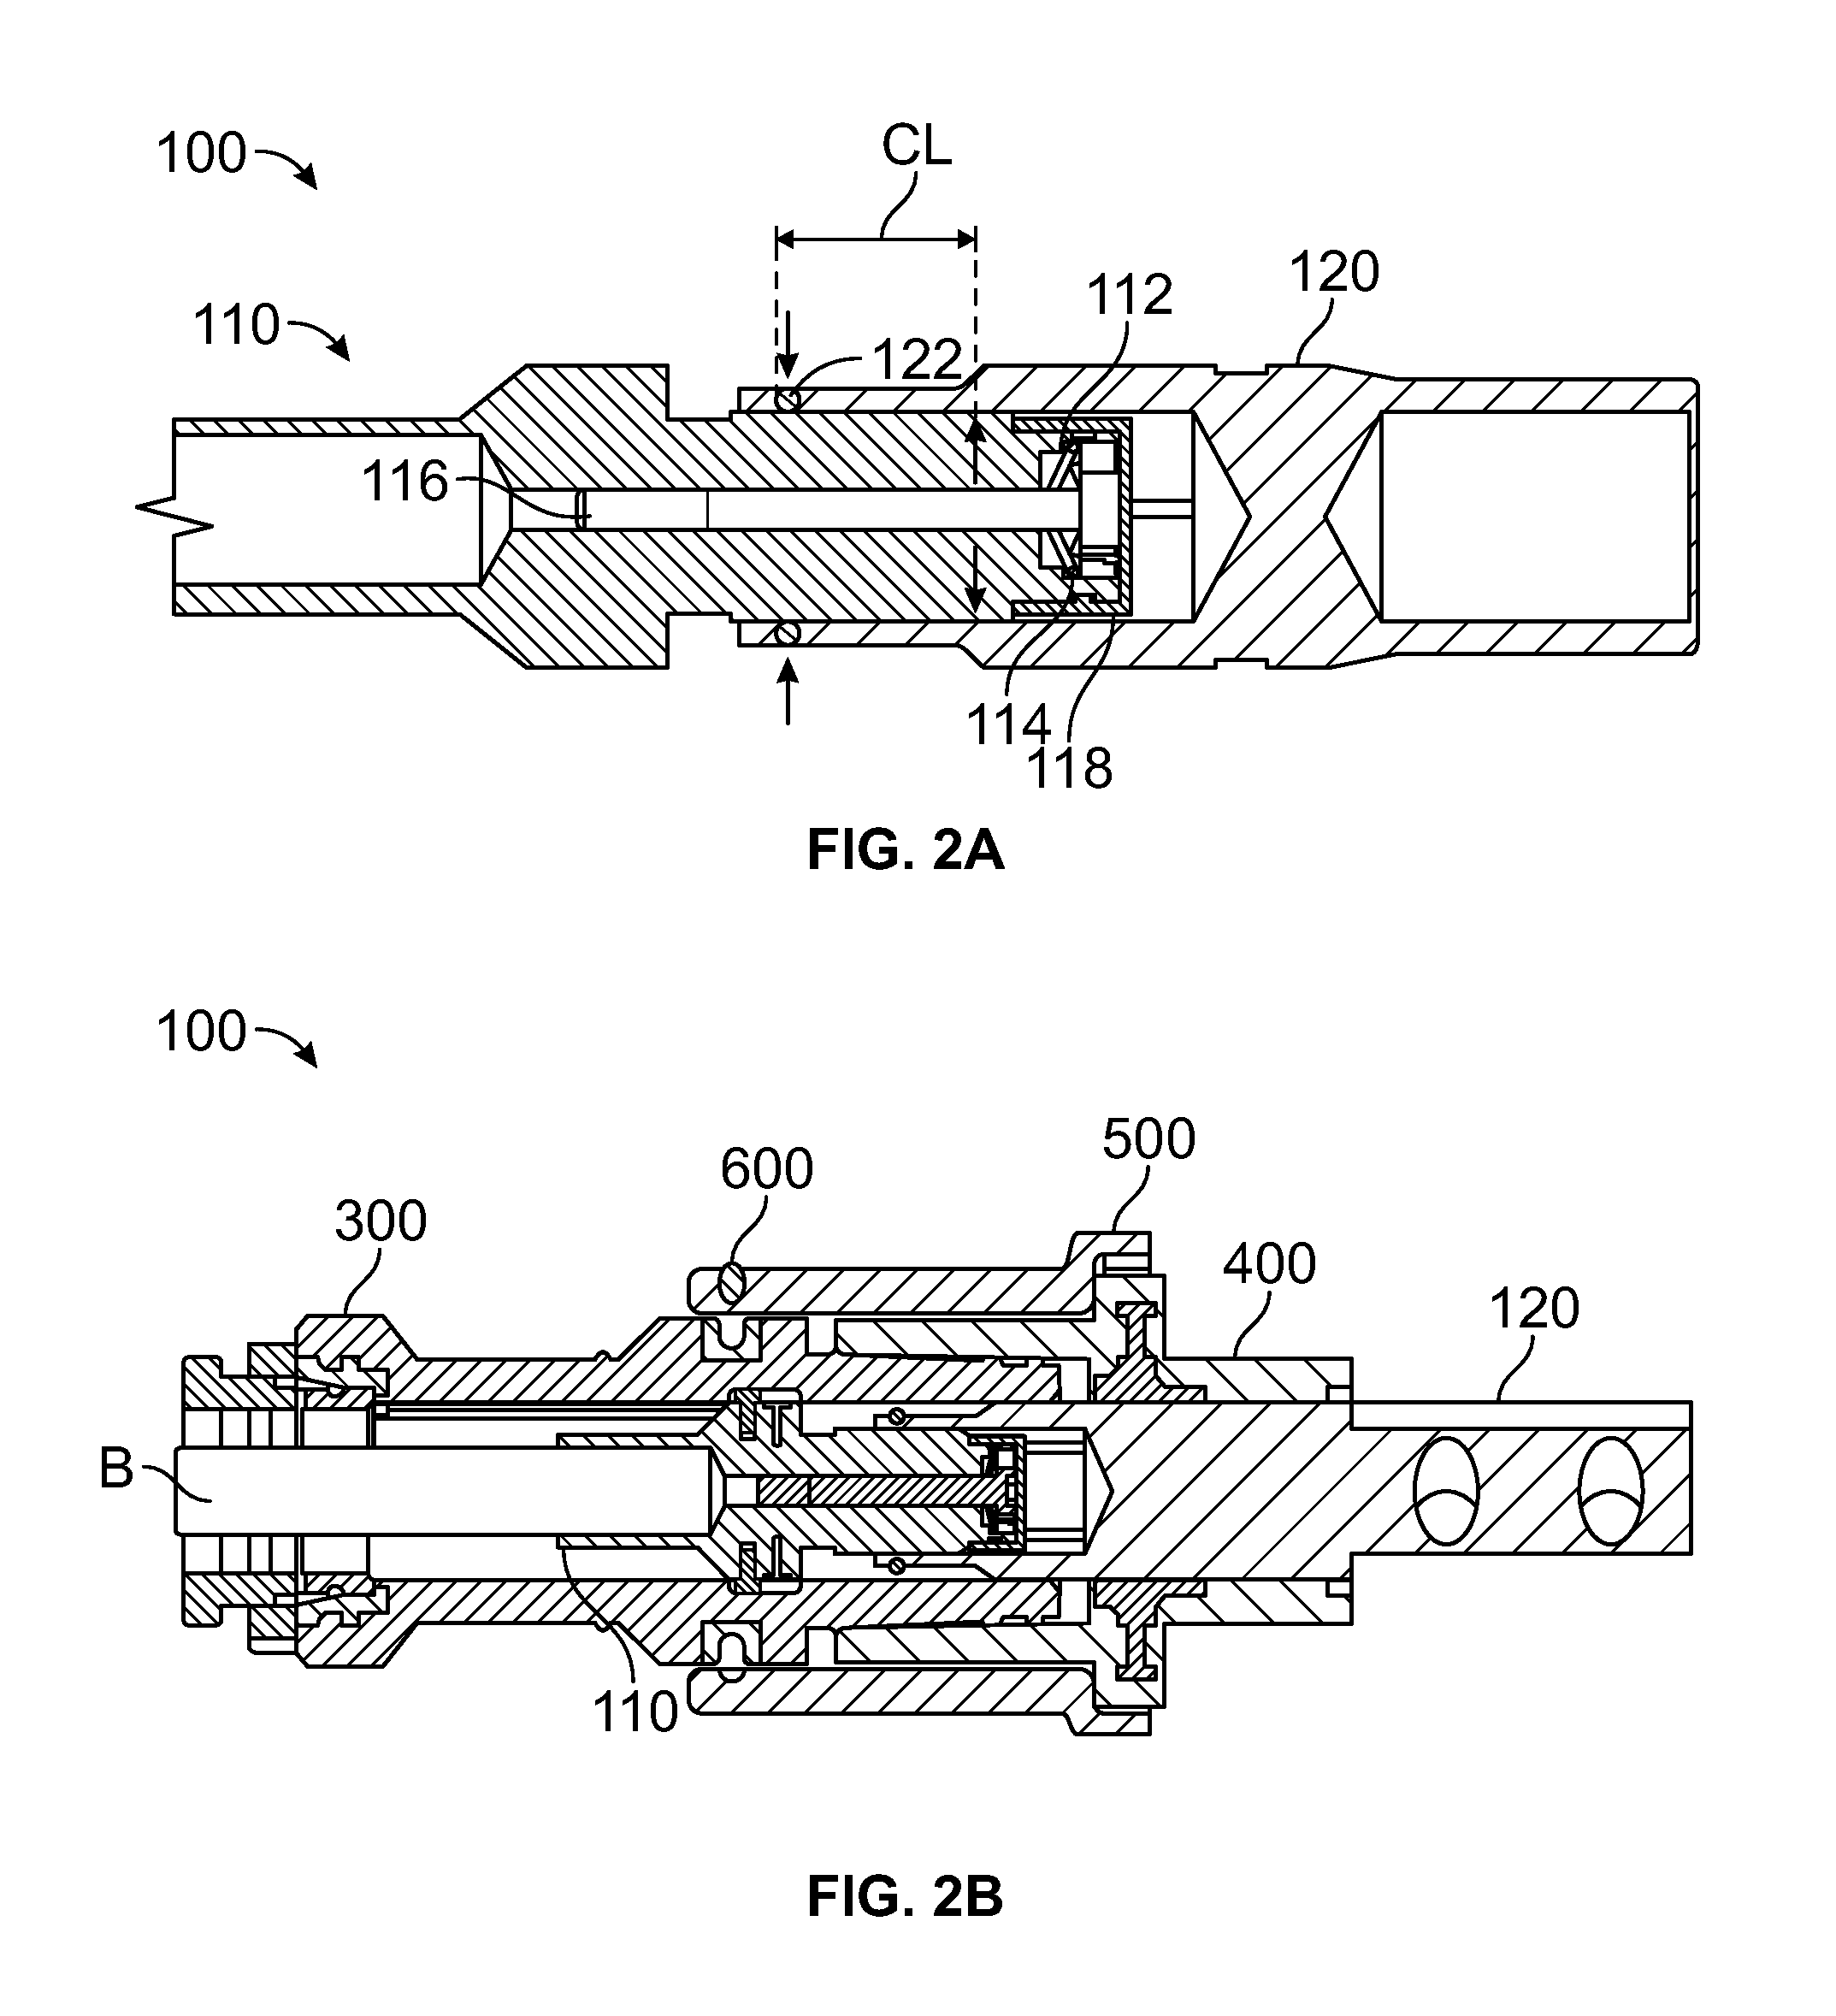 Connector assembly having self-adjusting male and female connector elements